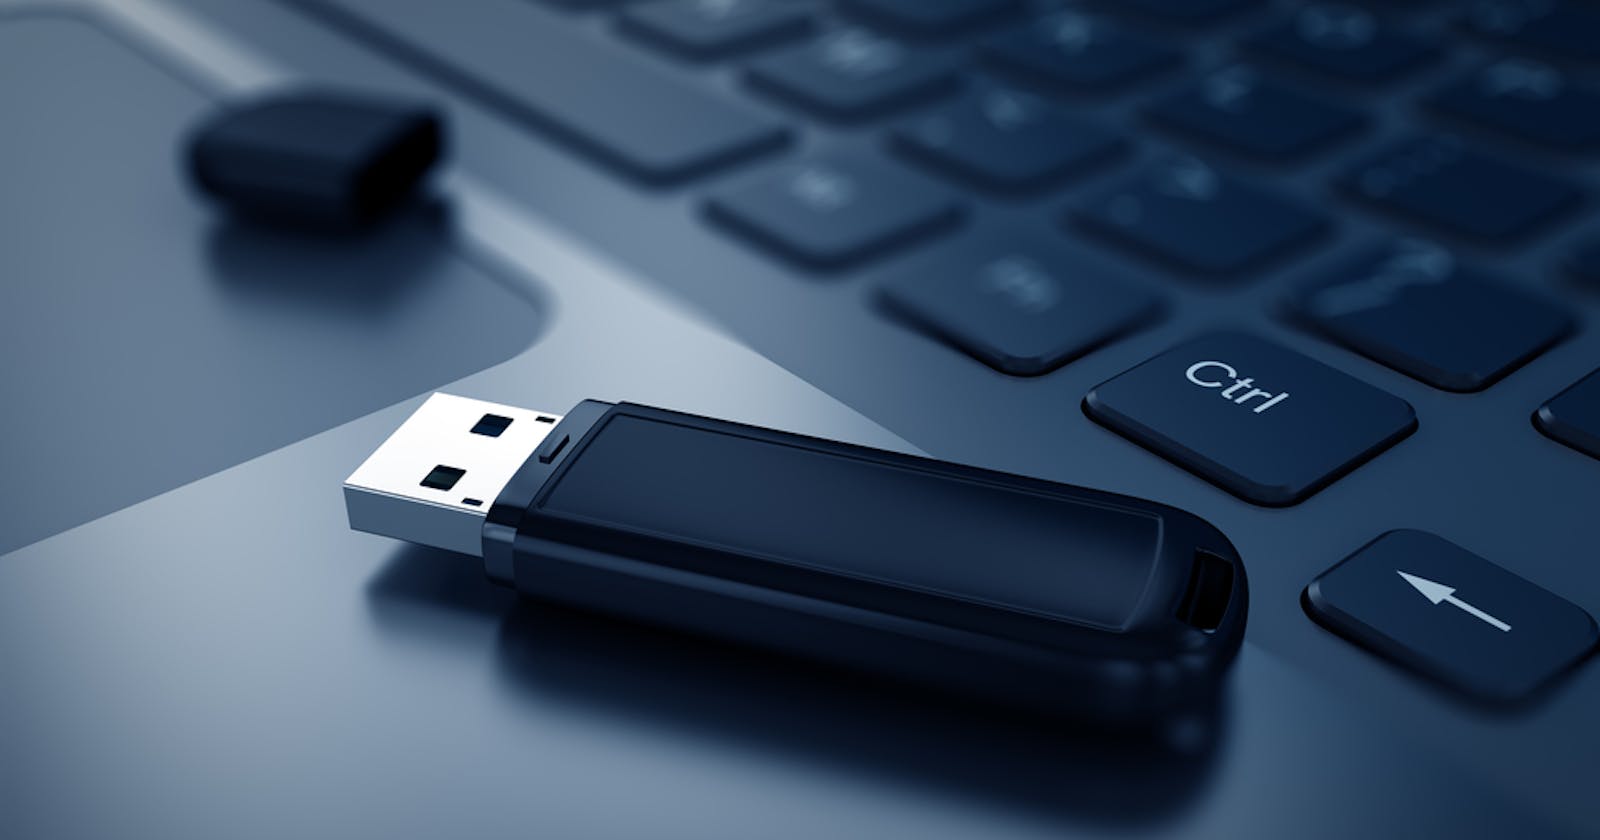 Make a bootable USB drive on any Linux distro